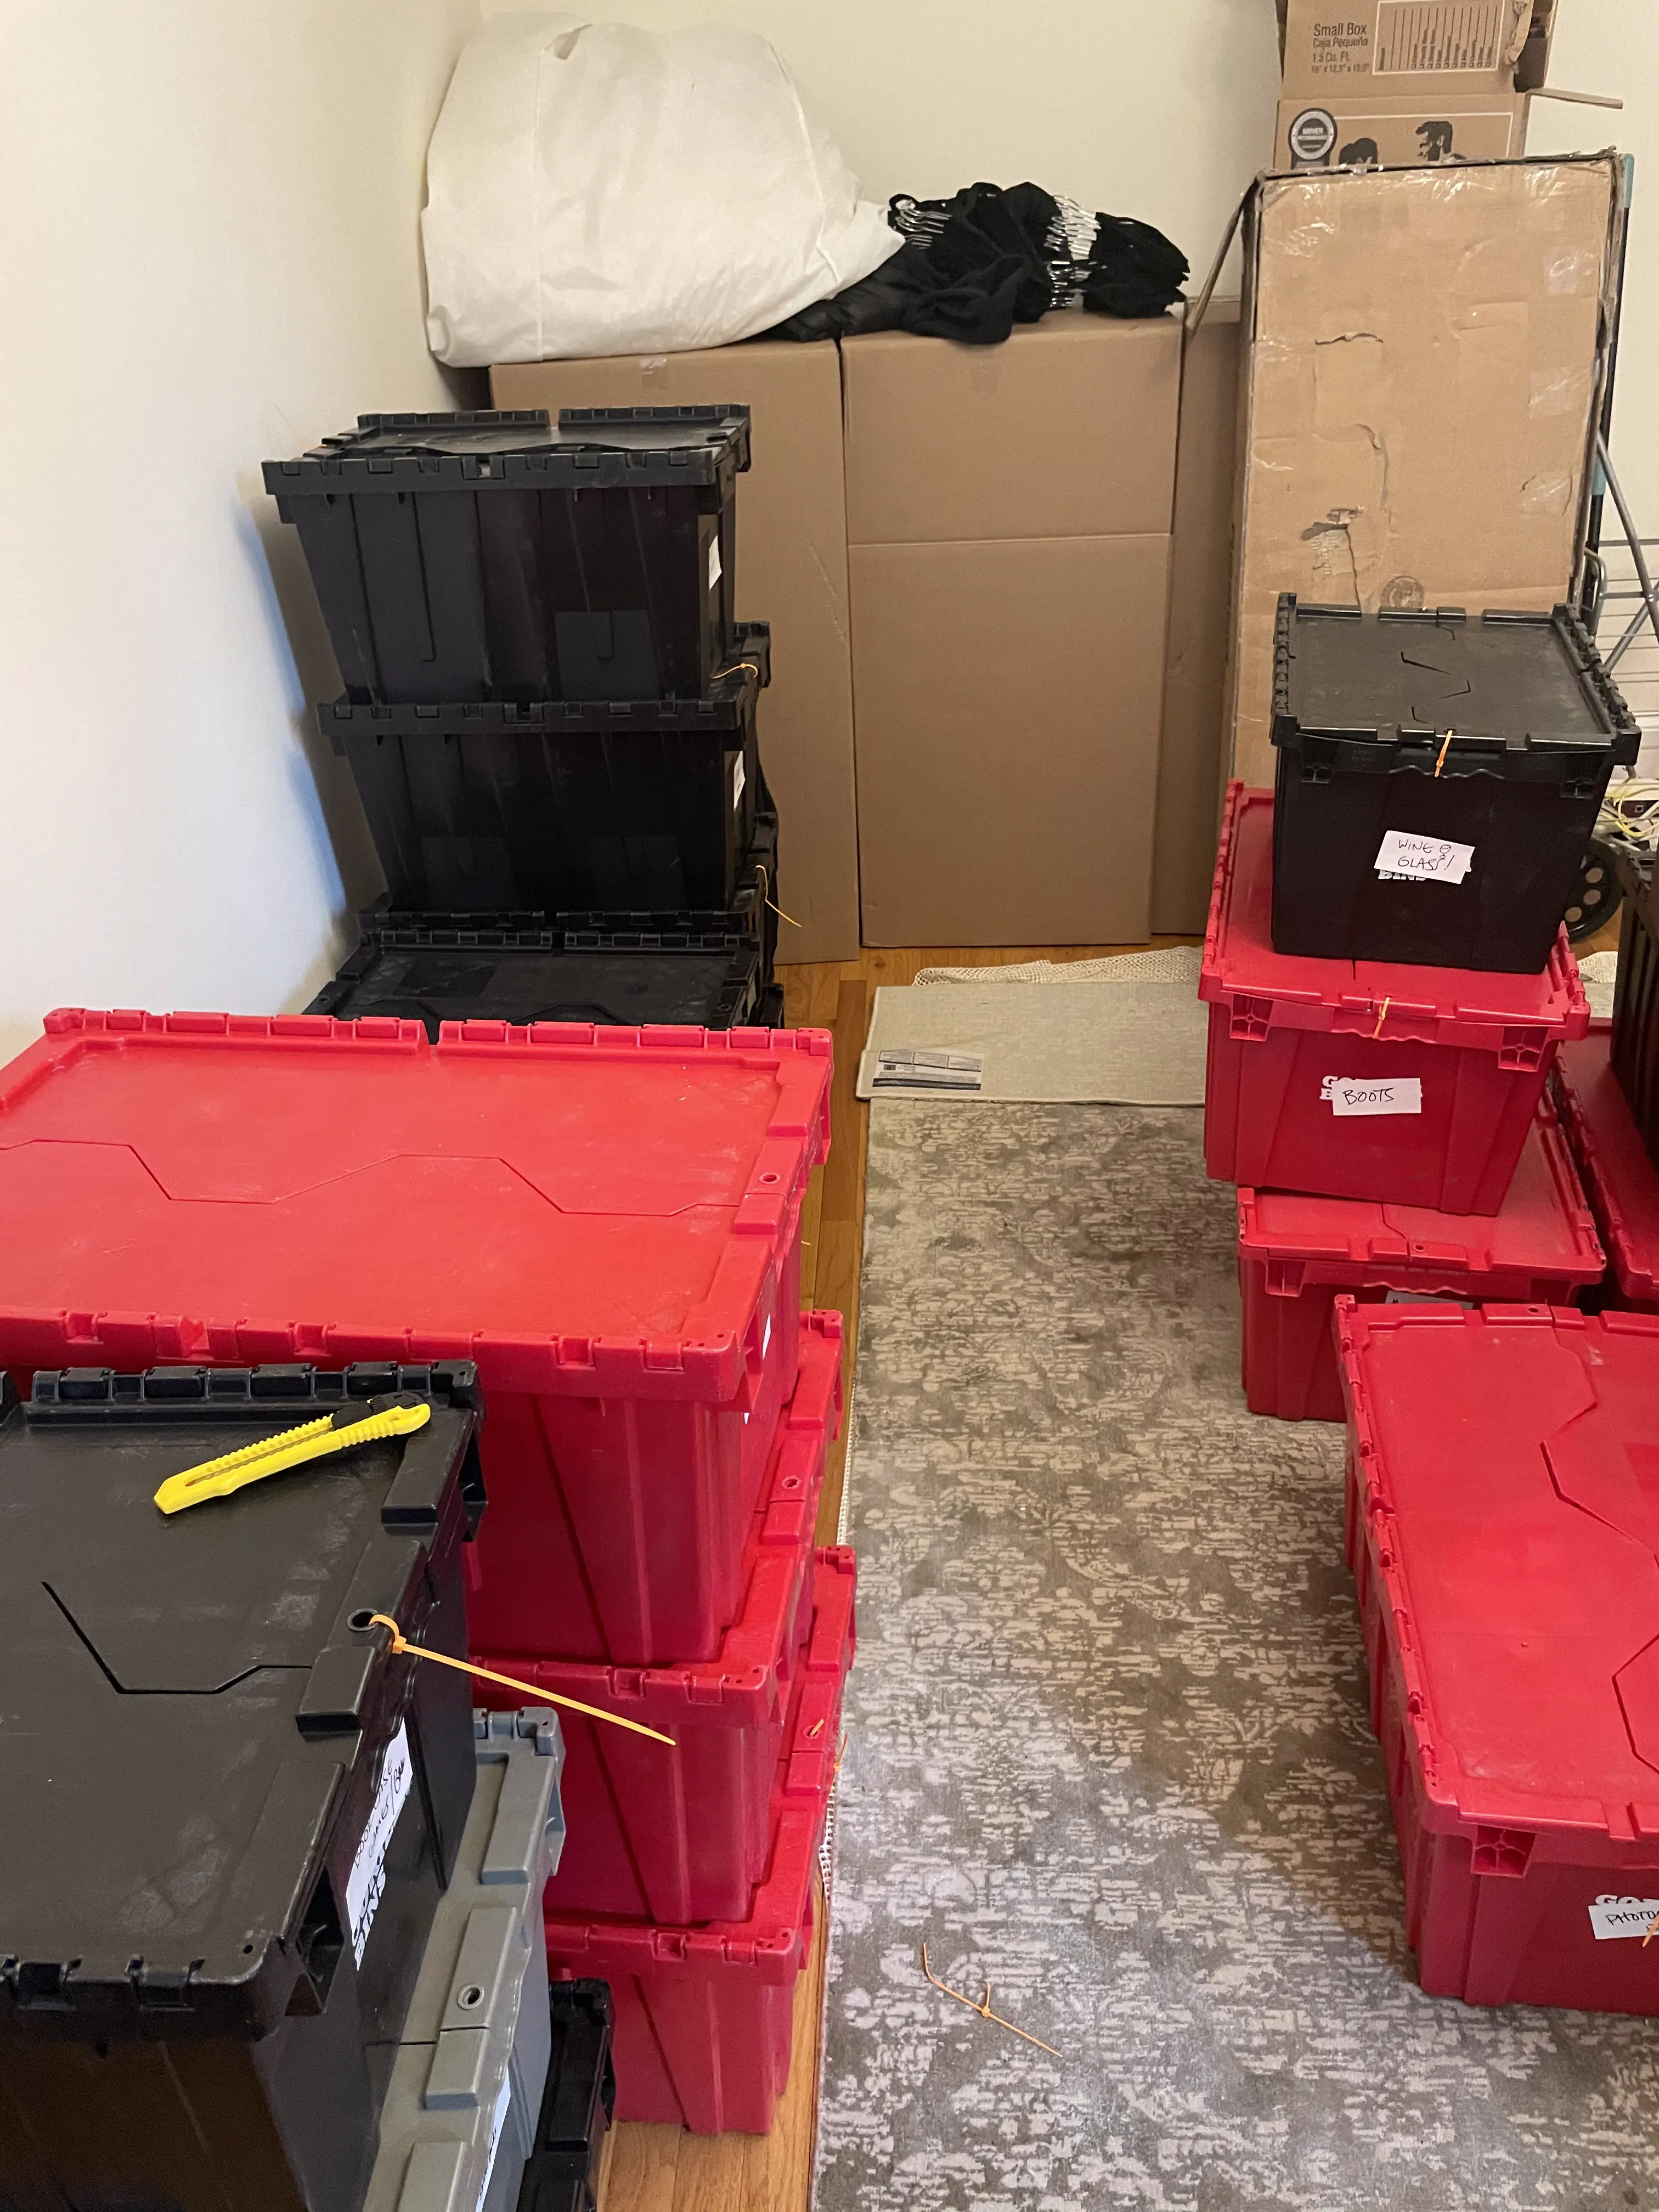 We moved using "Gorilla Bins." Can't recommend this strongly enough. They're strong, don't require you to make boxes from cardboard and don't clutter up your work area in big tape-wrapped piles as you unpack.